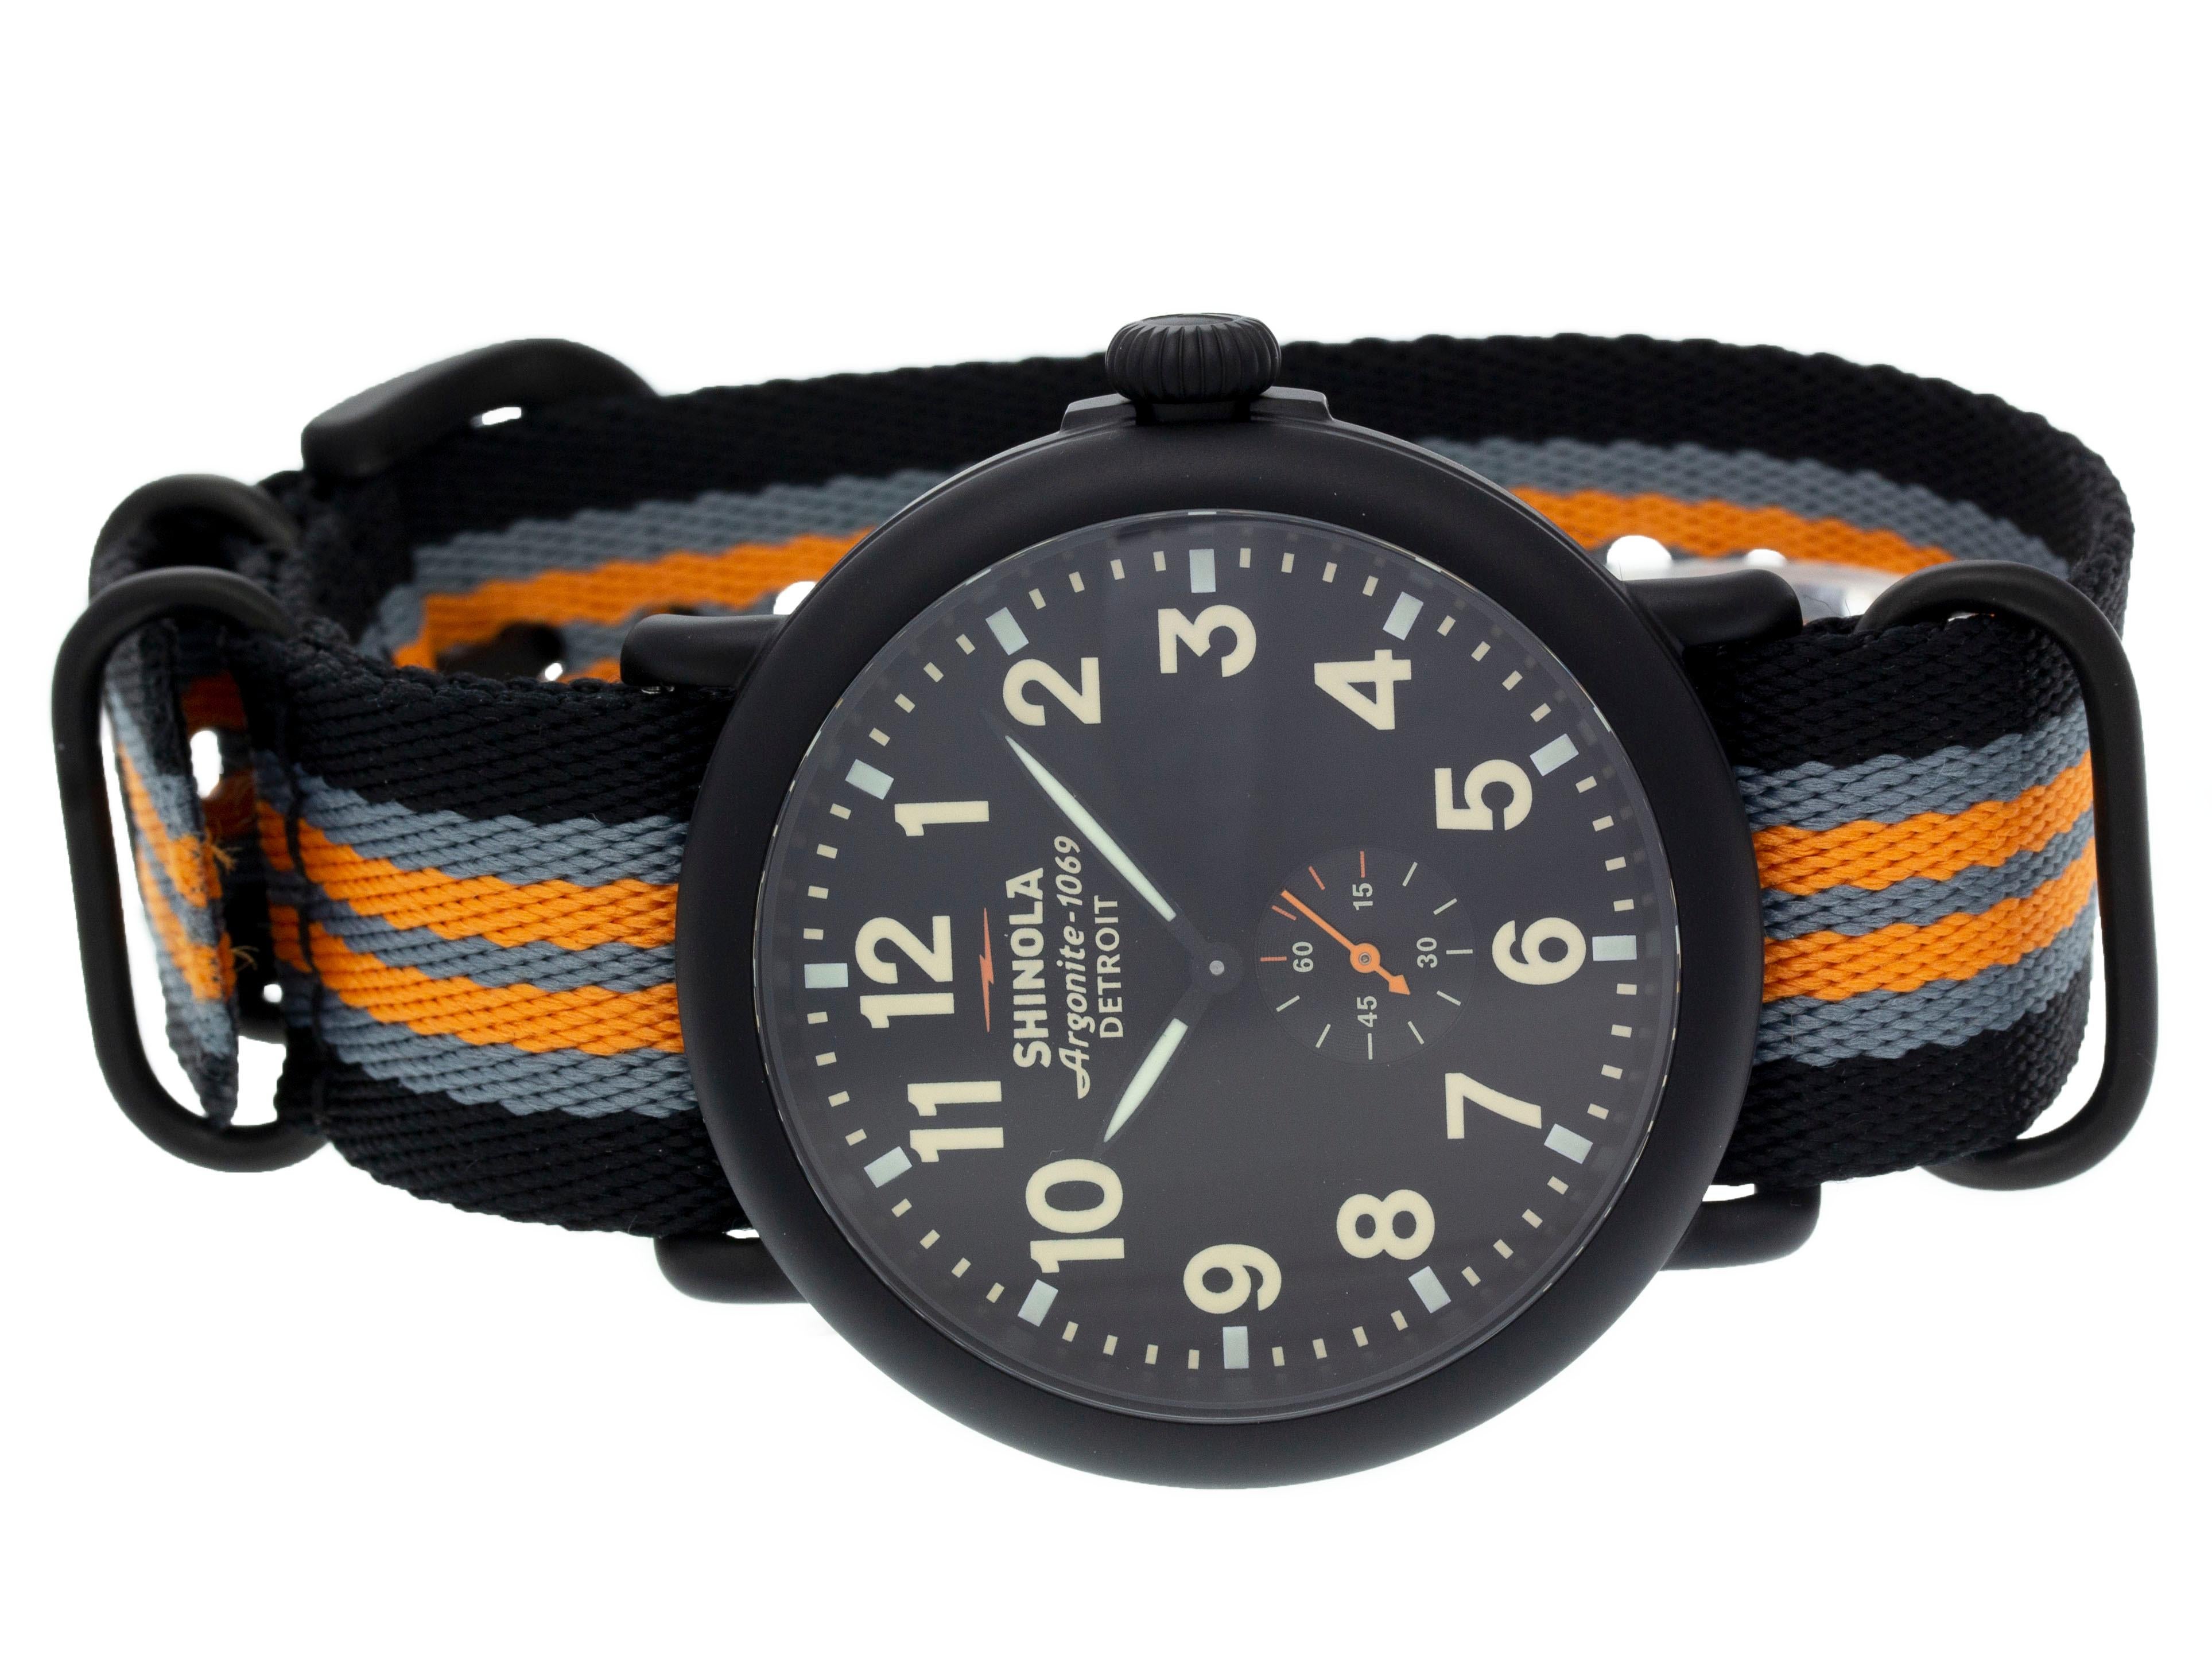 Black PVD steel Shinola The Runwell quartz watch with a 47mm case, black dial, and striped nylon strap with tang buckle. Features include hours, minutes, and seconds. Comes with a Deluxe Gift Box and 2 Year Store Warranty.​

Brand	Shinola
Series	The